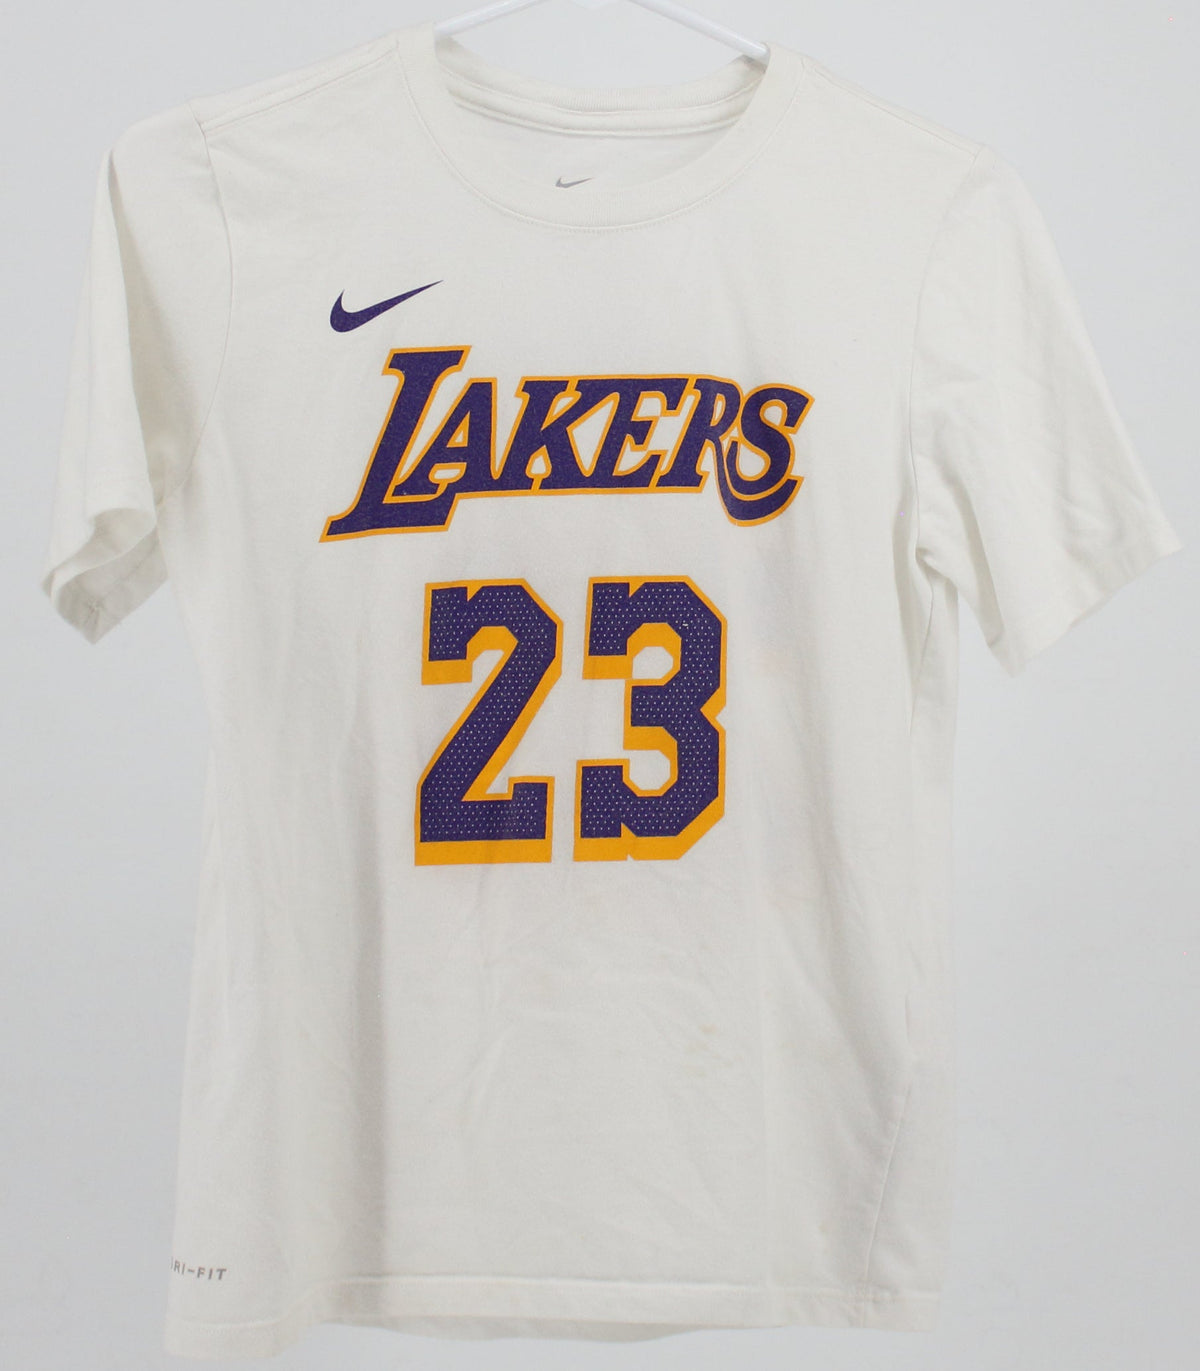 The Nike Tee Lakers 23 Silk Print Front and Back White T-Shirt